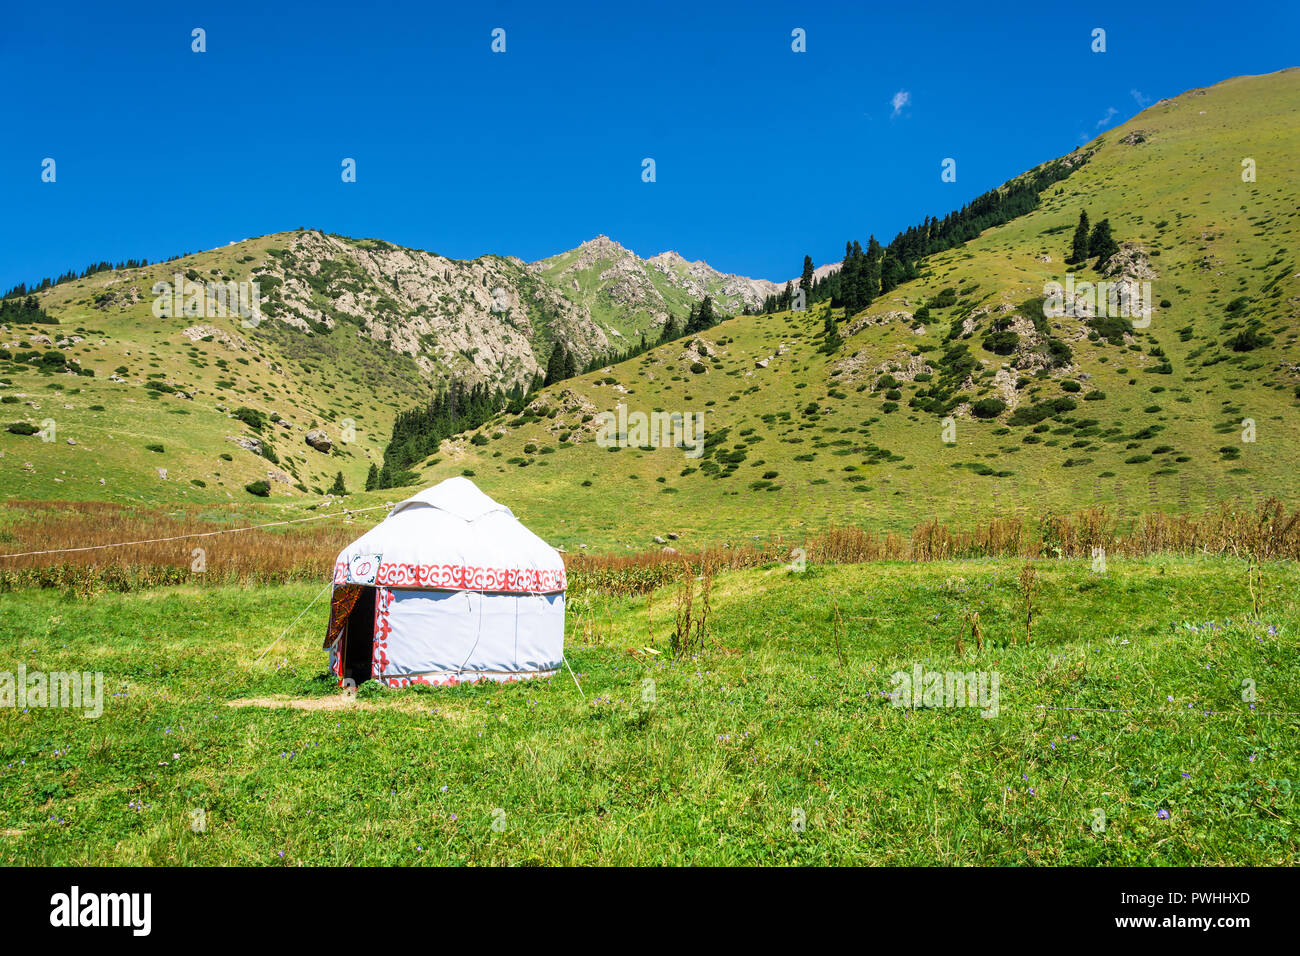 Beautiful mountain landscape with the white Yurt, decorated with a red ornament, Kyrgyzstan. Stock Photo